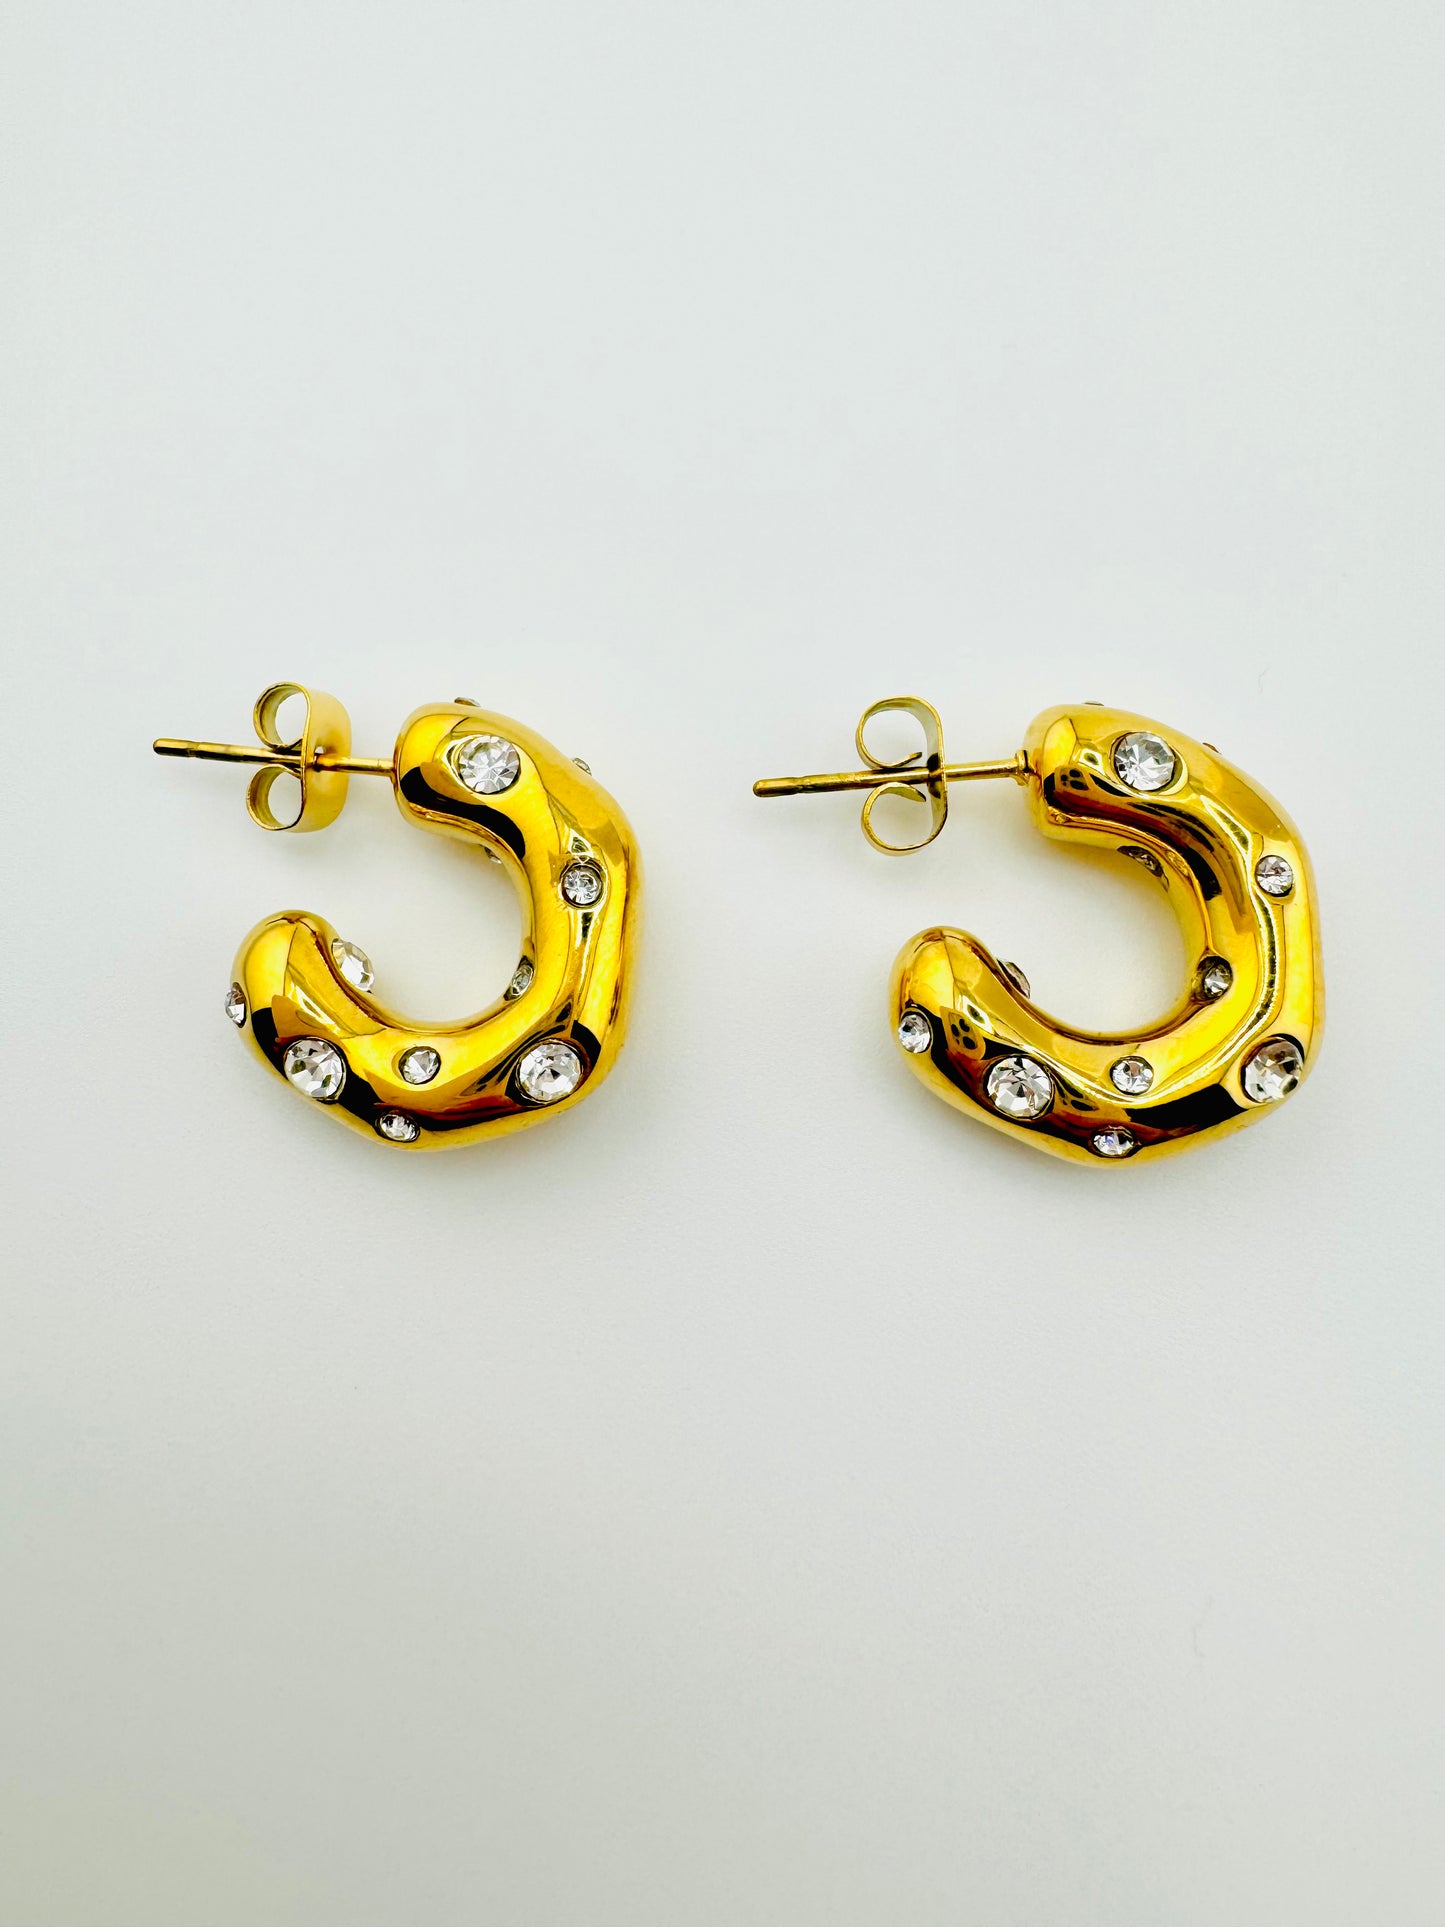 Daisy gold filled earrings with rhinestones